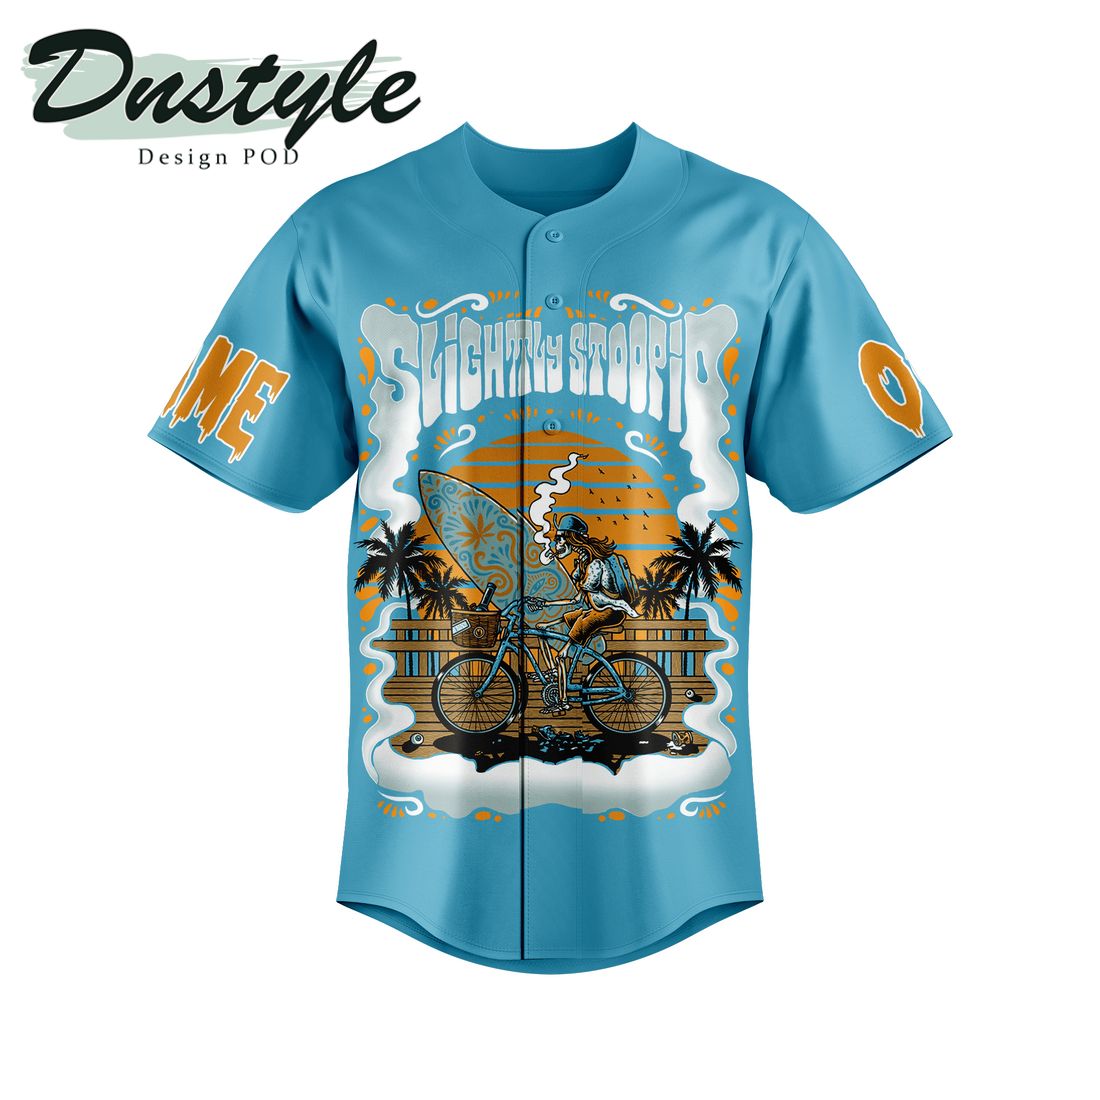 Slightly Stoopid closer to the sun personalized baseball jersey